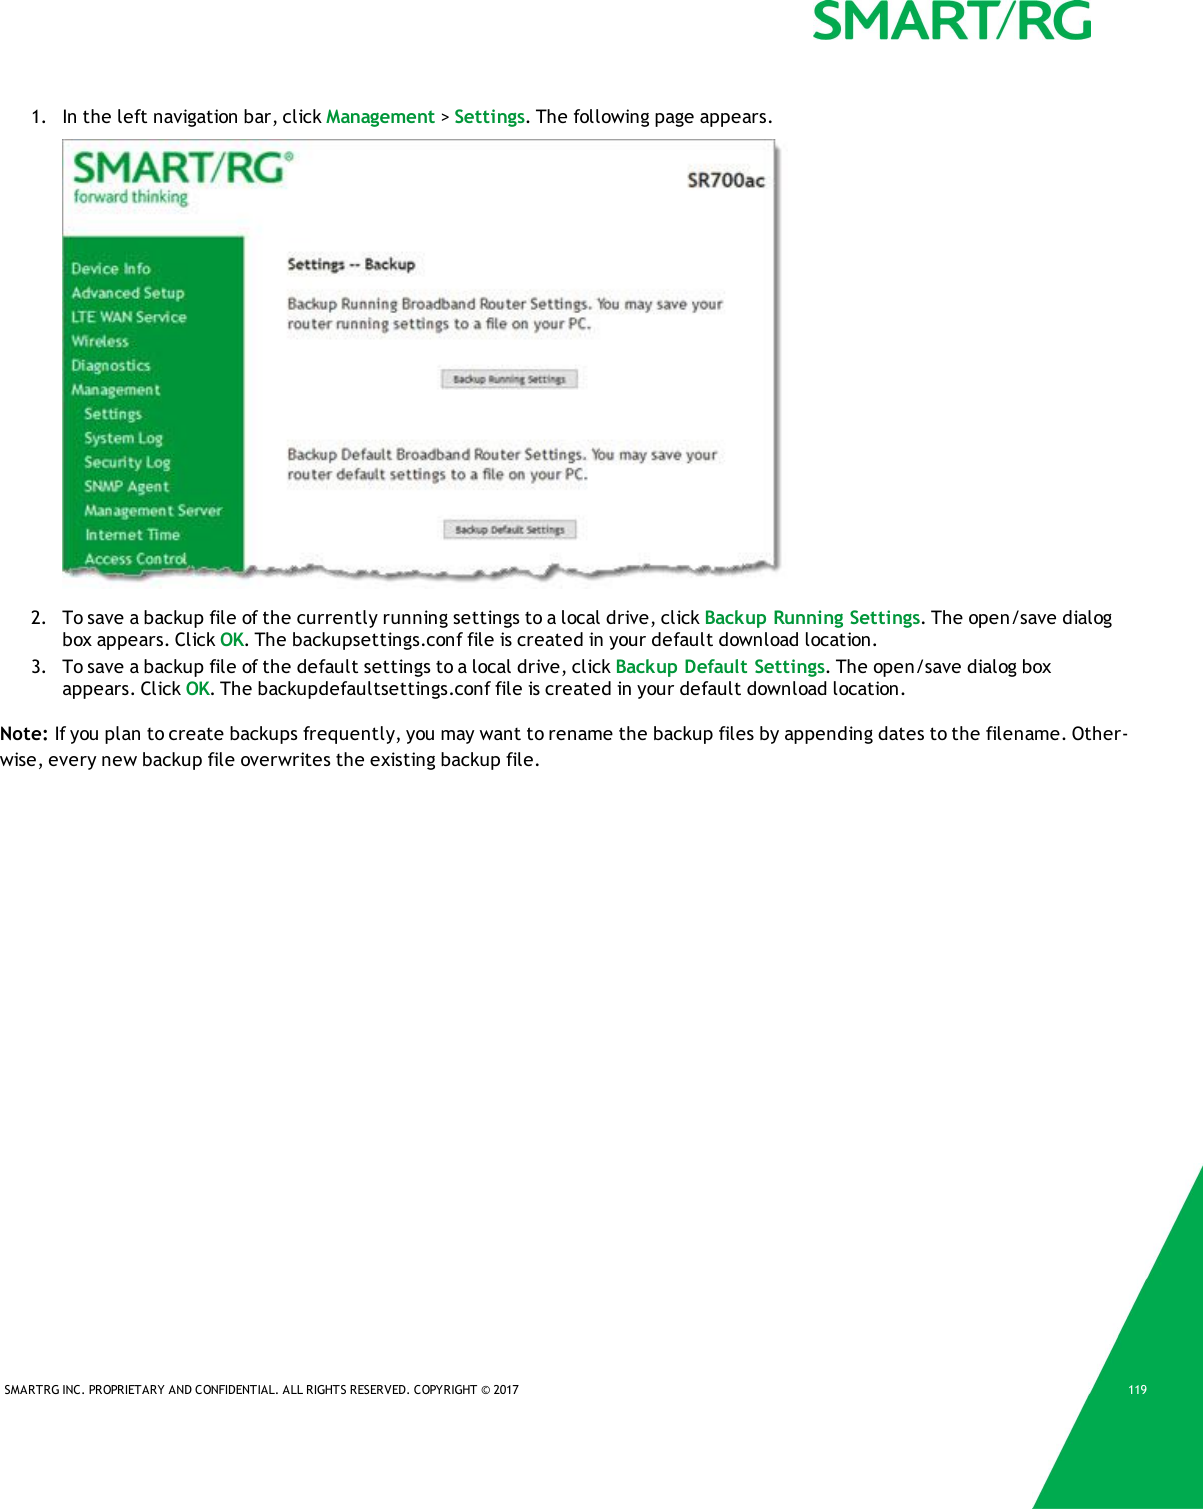 SMARTRG INC. PROPRIETARY AND CONFIDENTIAL. ALL RIGHTS RESERVED. COPYRIGHT © 2017 1191. In the left navigation bar, click Management &gt;Settings. The following page appears.2. To save a backup file of the currently running settings to a local drive, click Backup Running Settings. The open/save dialogbox appears. Click OK. The backupsettings.conf file is created in your default download location.3. To save a backup file of the default settings to a local drive, click Backup Default Settings. The open/save dialog boxappears. Click OK. The backupdefaultsettings.conf file is created in your default download location.Note: If you plan to create backups frequently, you may want to rename the backup files by appending dates to the filename. Other-wise, every new backup file overwrites the existing backup file.